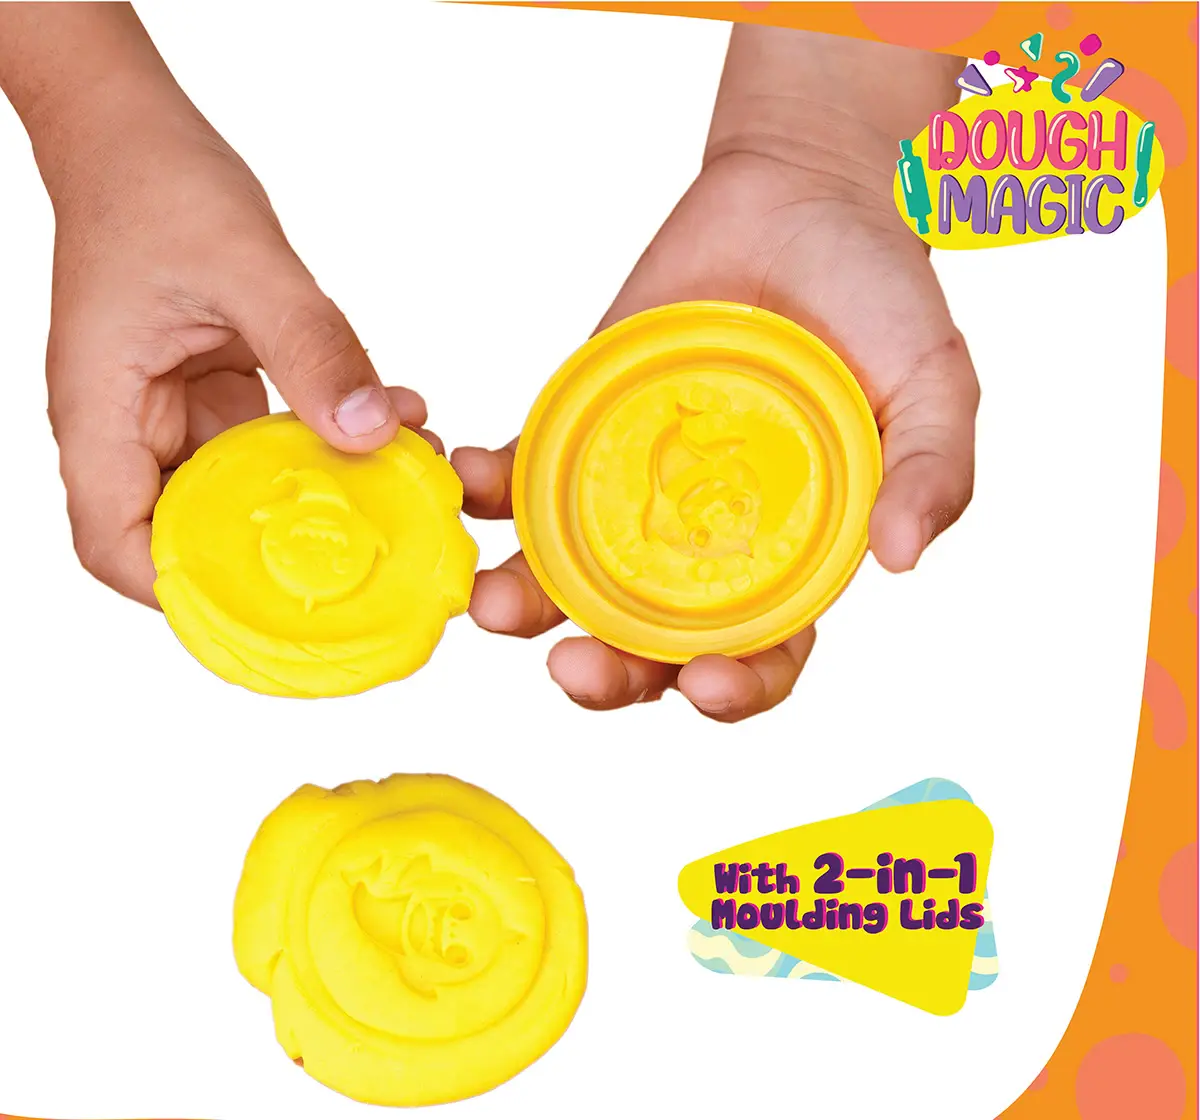 Dough Magic Baby Shark Dough Tubs With 2 in 1 Moulding Lid Pack of 6 For Kids of Age 3Y+, Multicolour